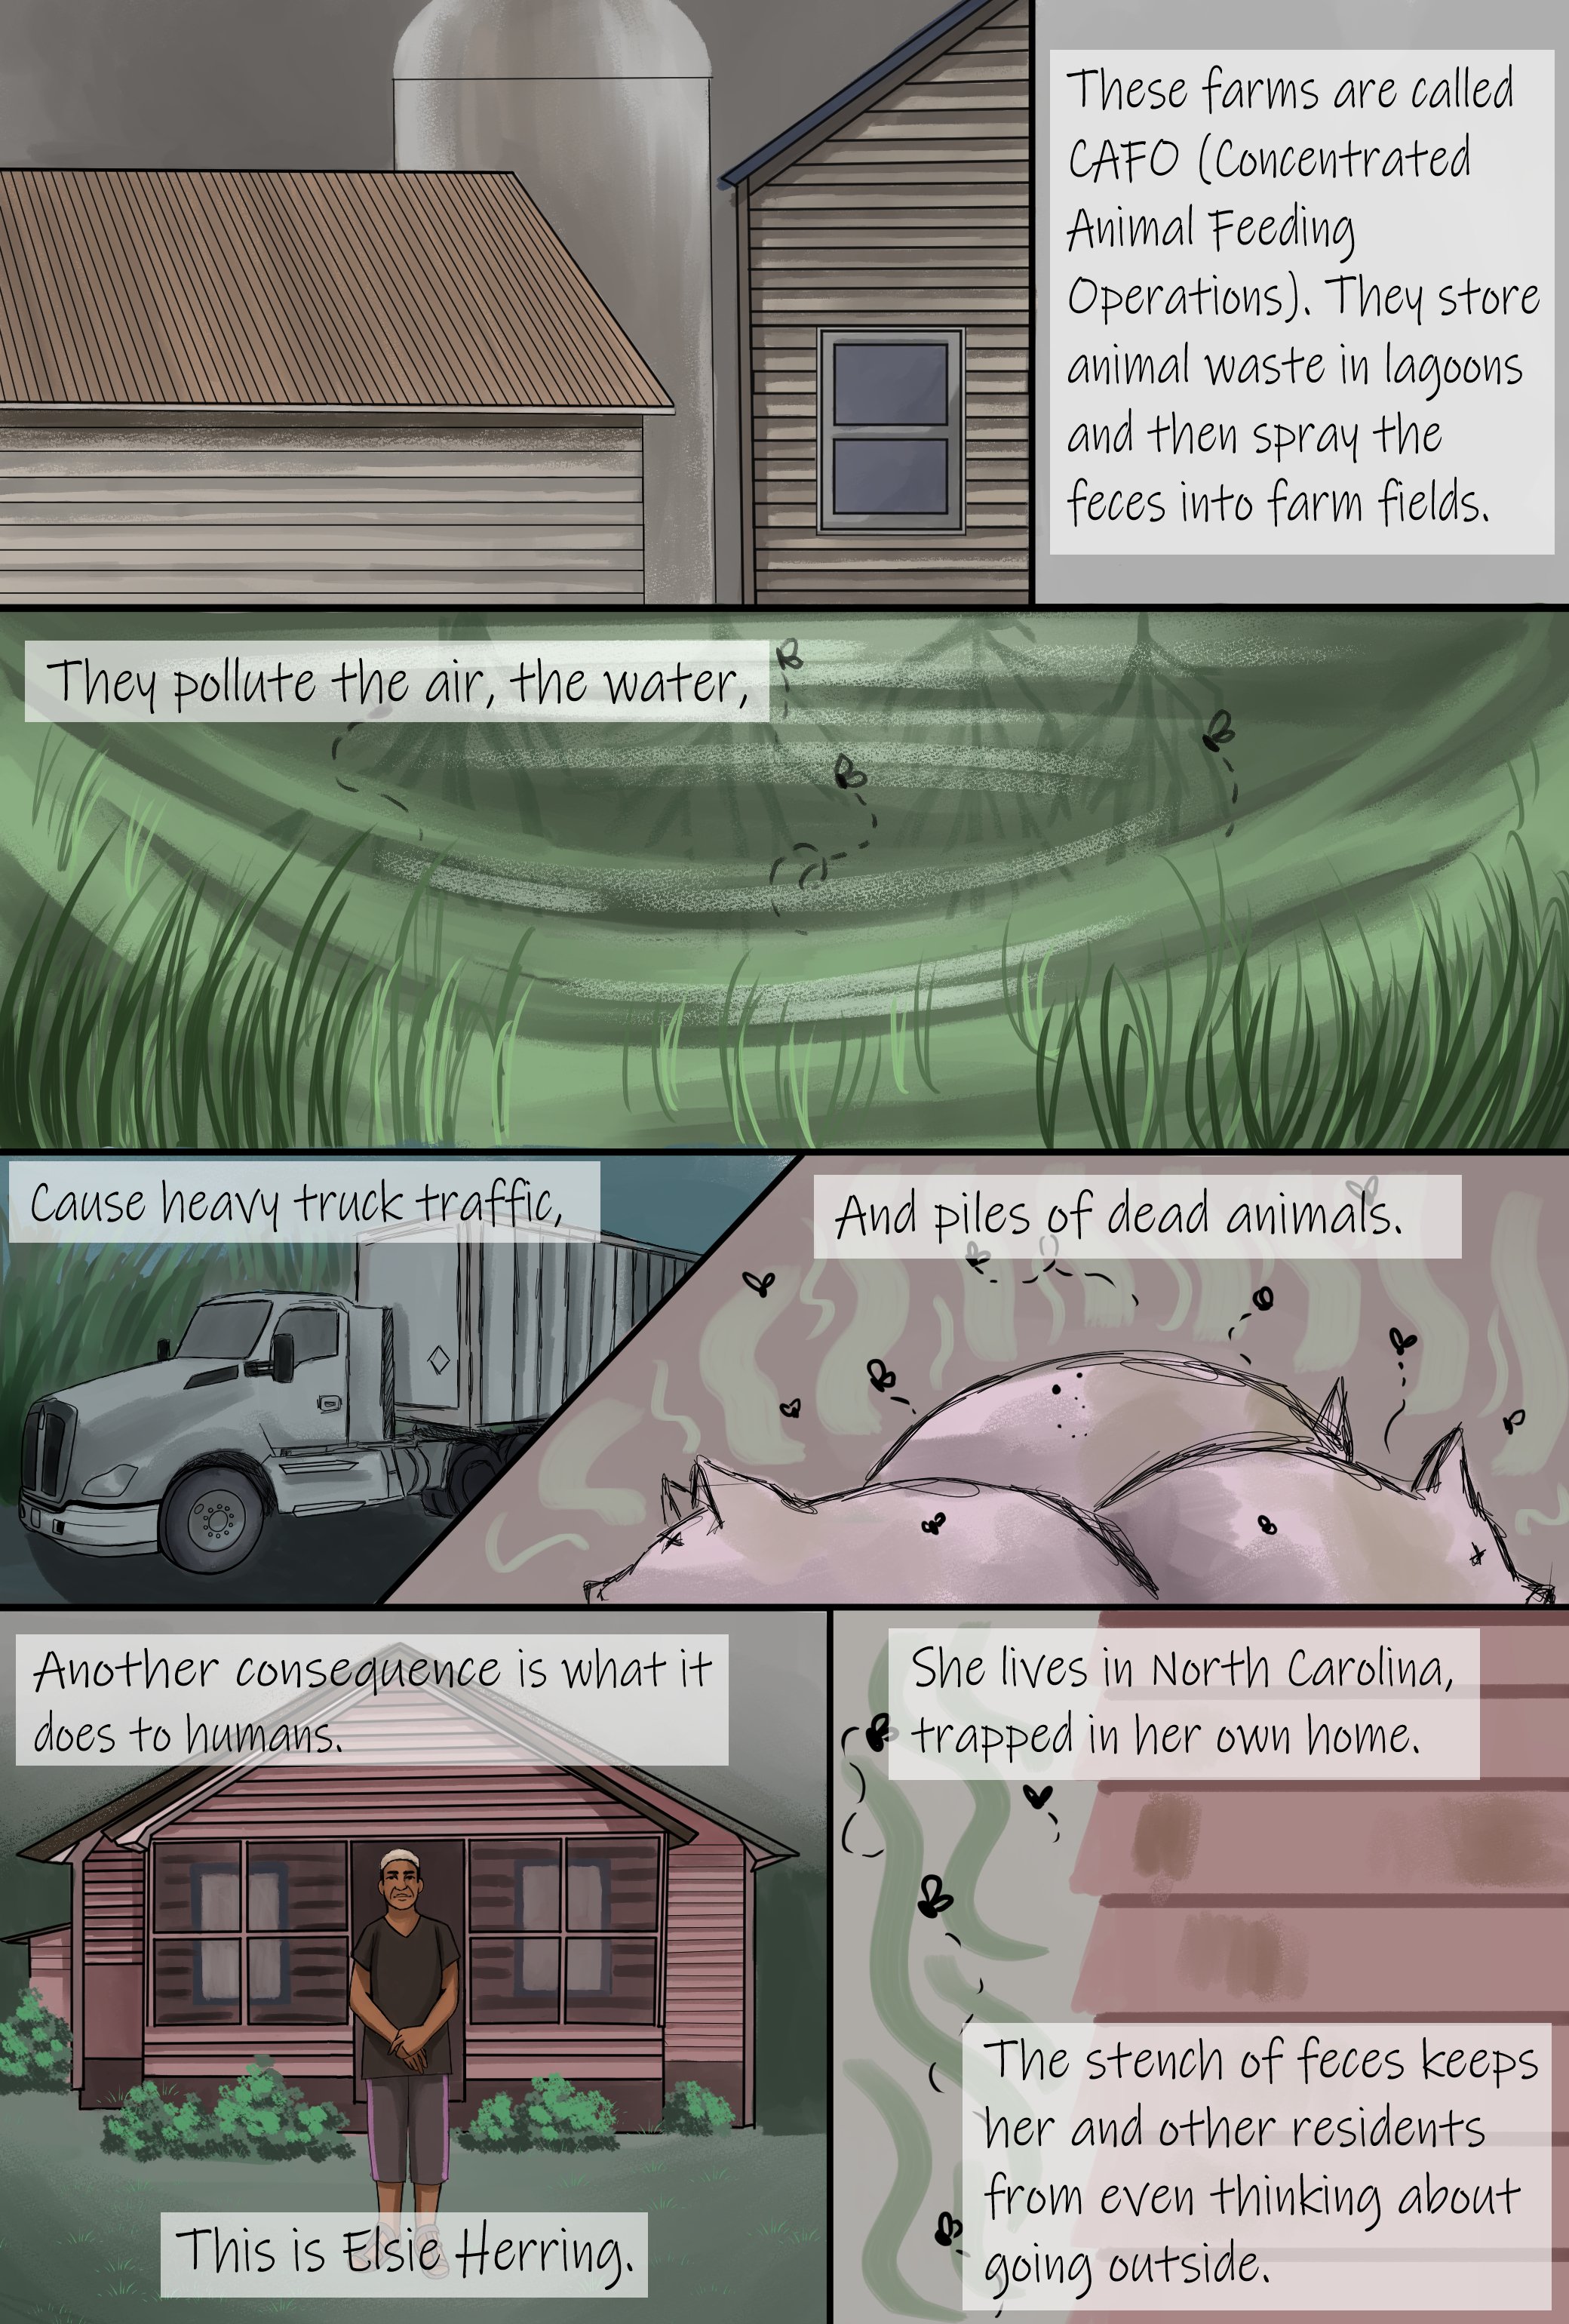   Agricultural Waste: Factory Farm Pollution. (2020).  Excerpt from one TPC member’s graphic short story.  